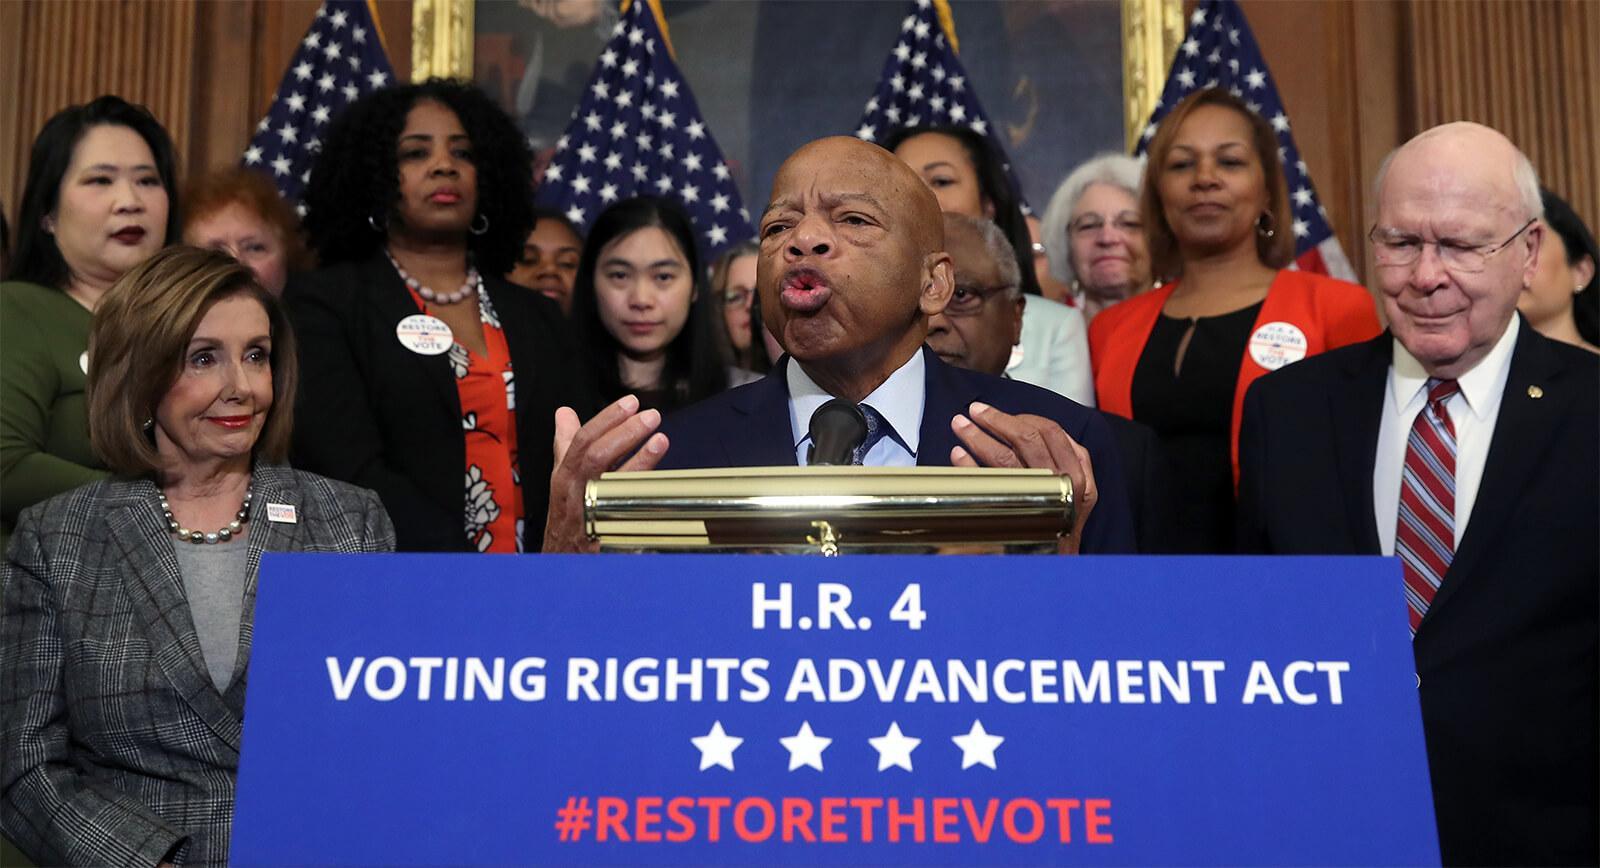 Civil rights icon Rep. John Lewis, D-Ga, speaks in support of H.R. 4